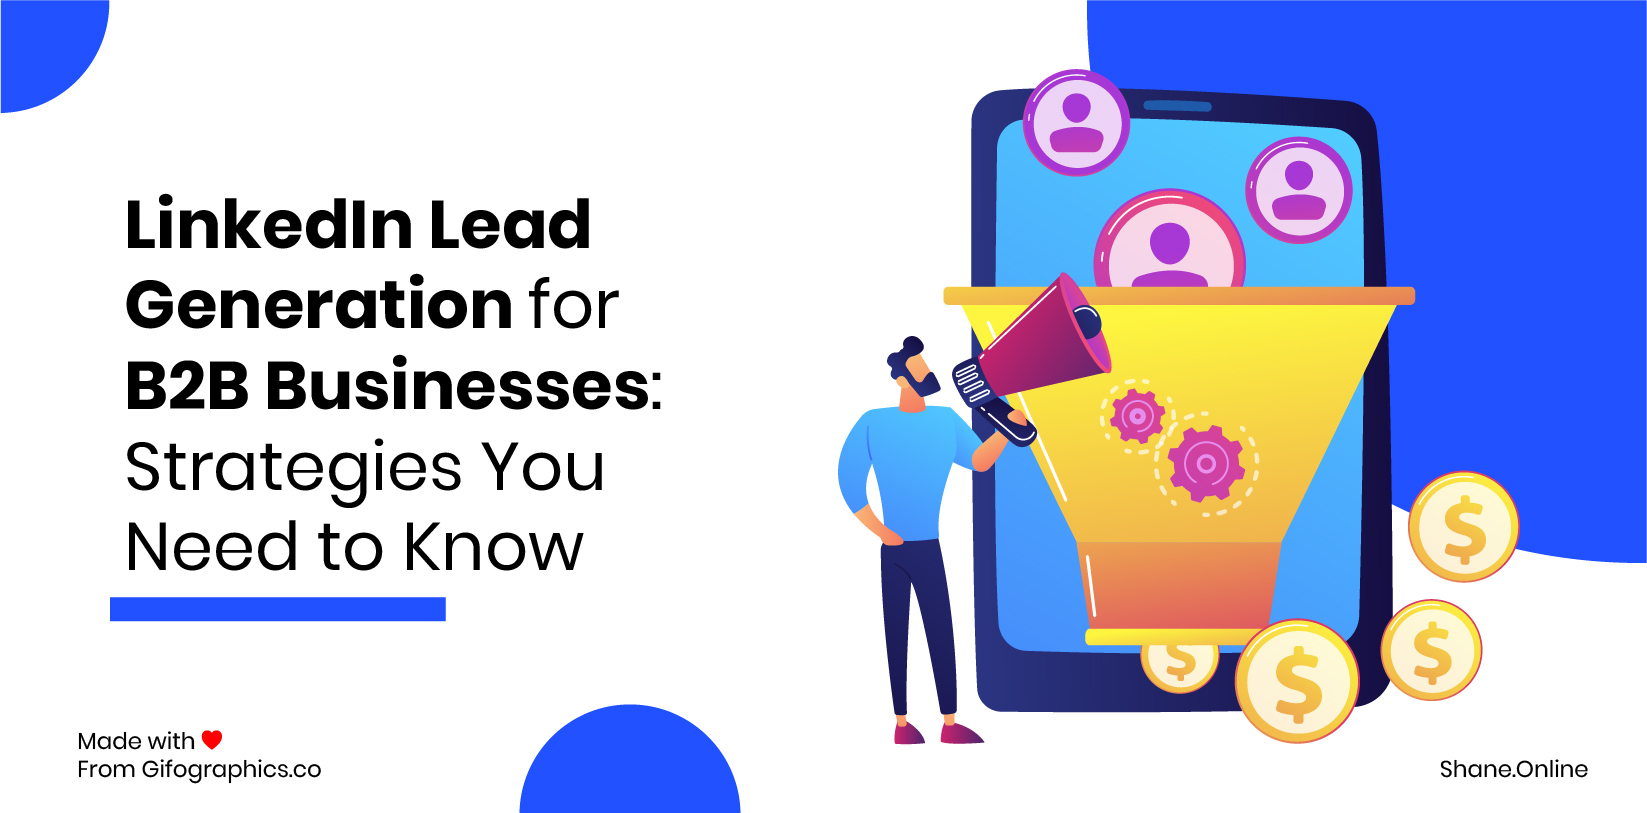 LinkedIn Lead Generation for B2B Businesses- Strategies You Need to Know